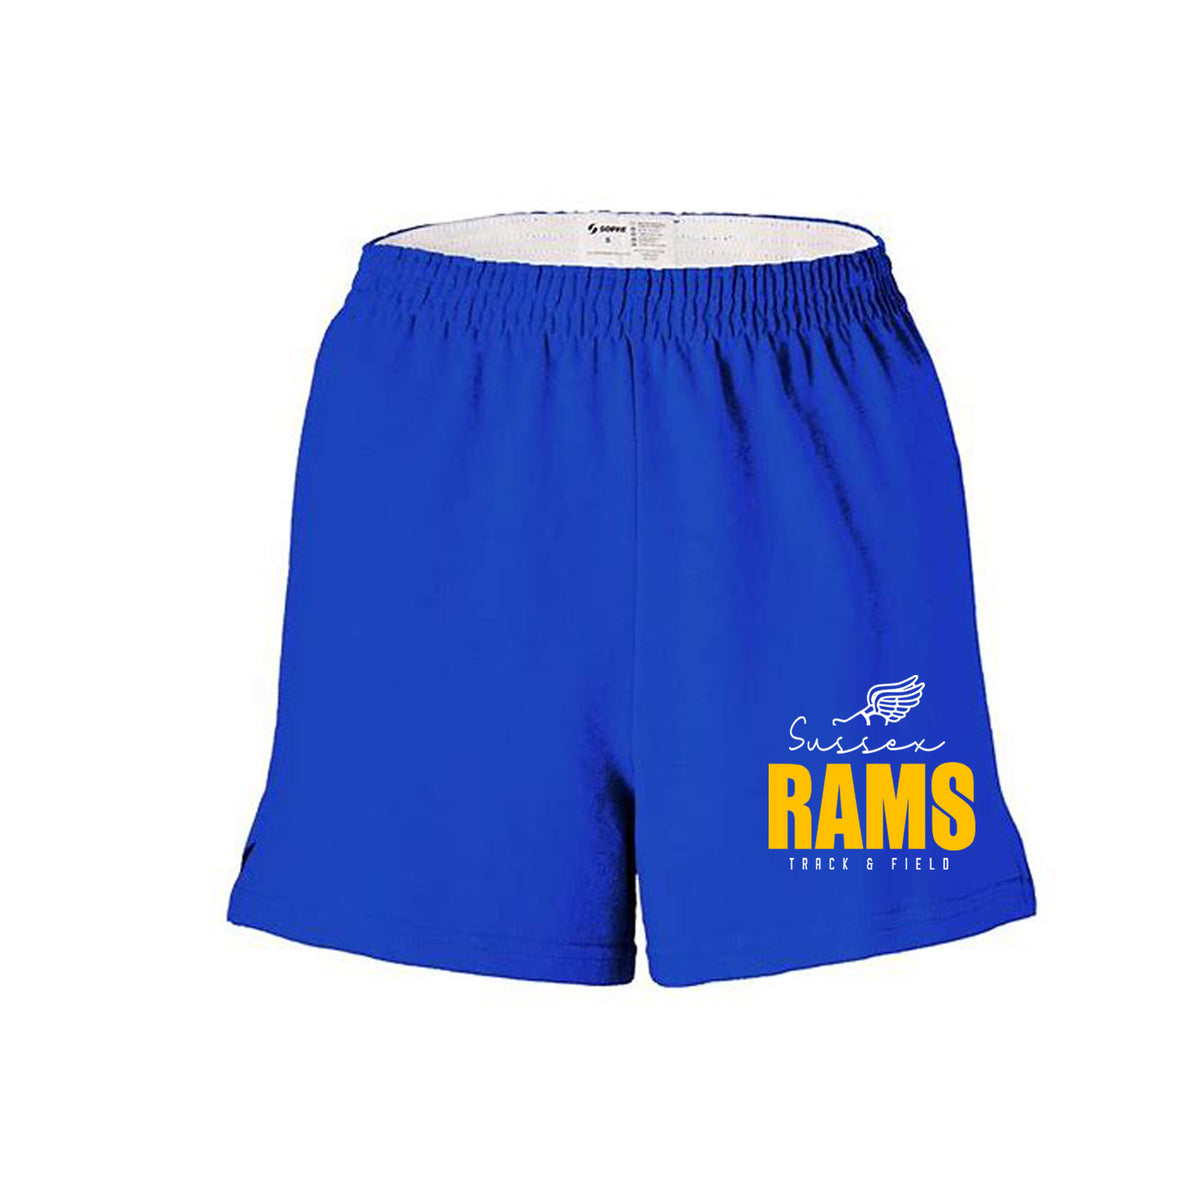 Sussex Rams Track girls Shorts Design 4